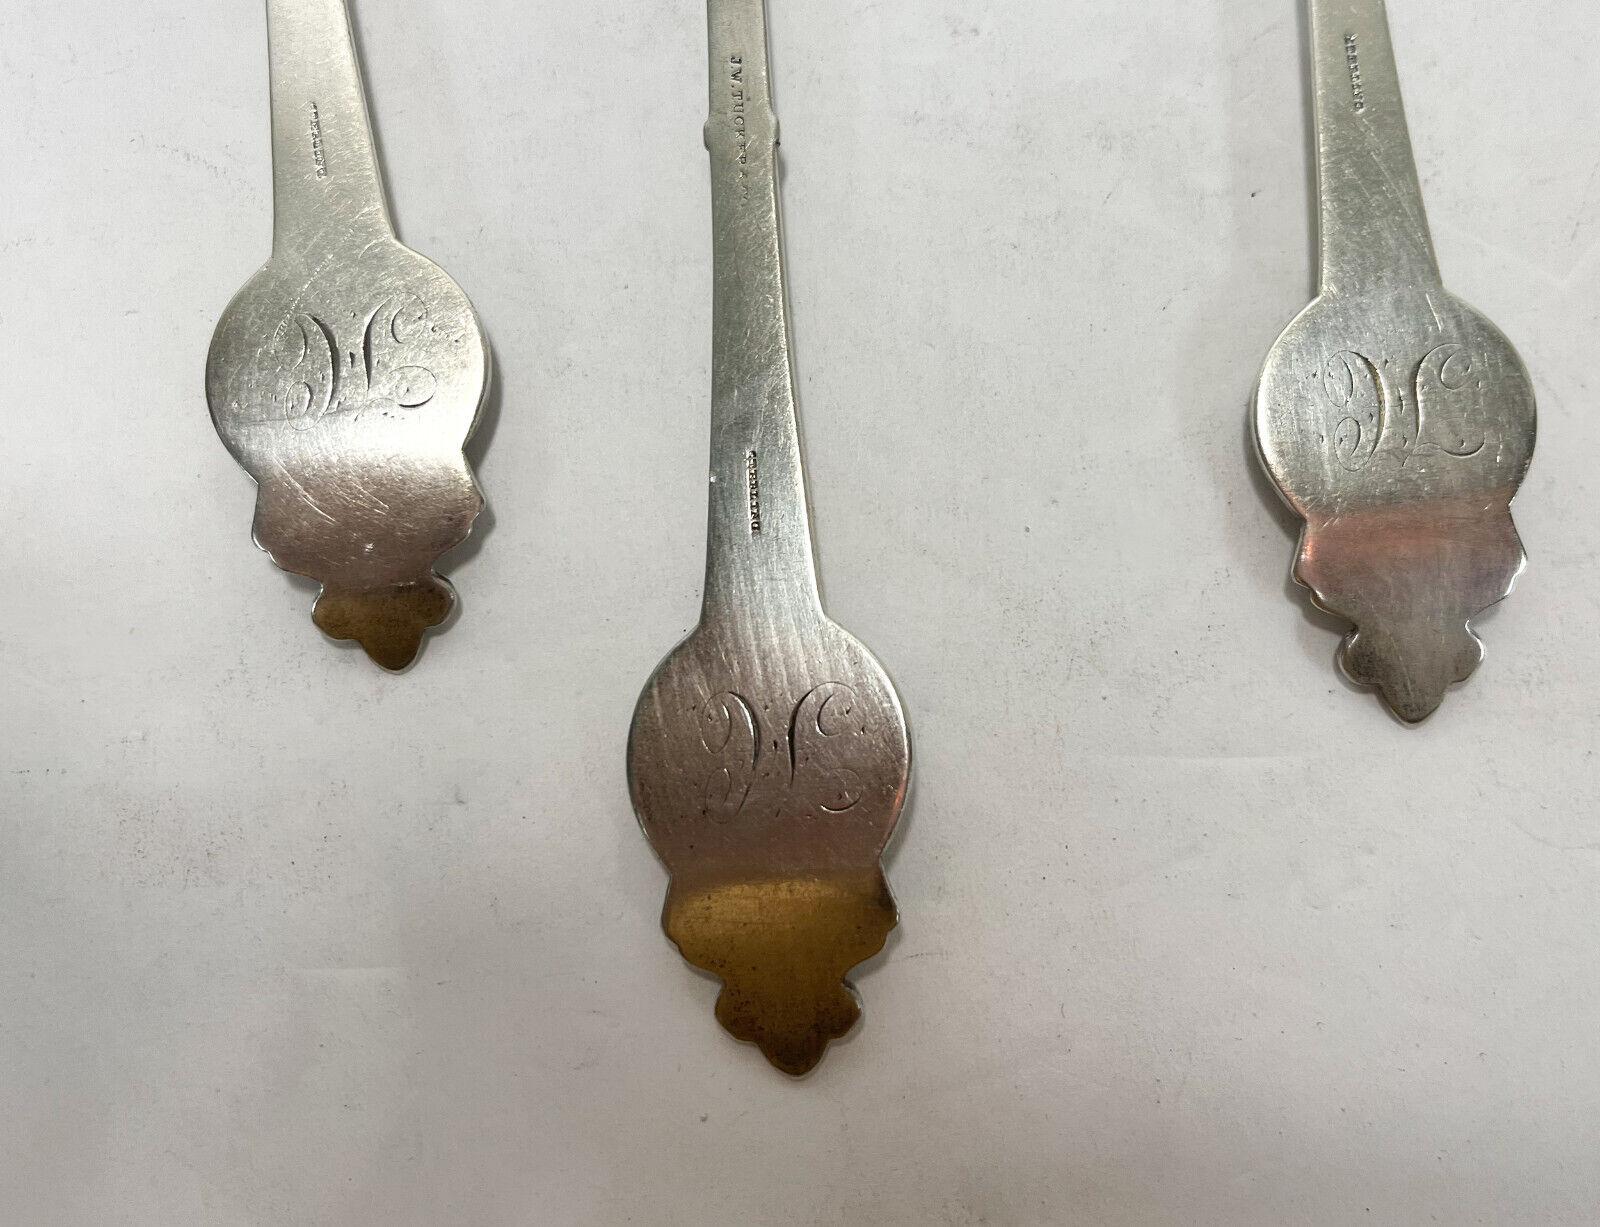  7 Gorham Sterling Silver Medallion 8.5 inch Tablespoons, Late 19th Century  1